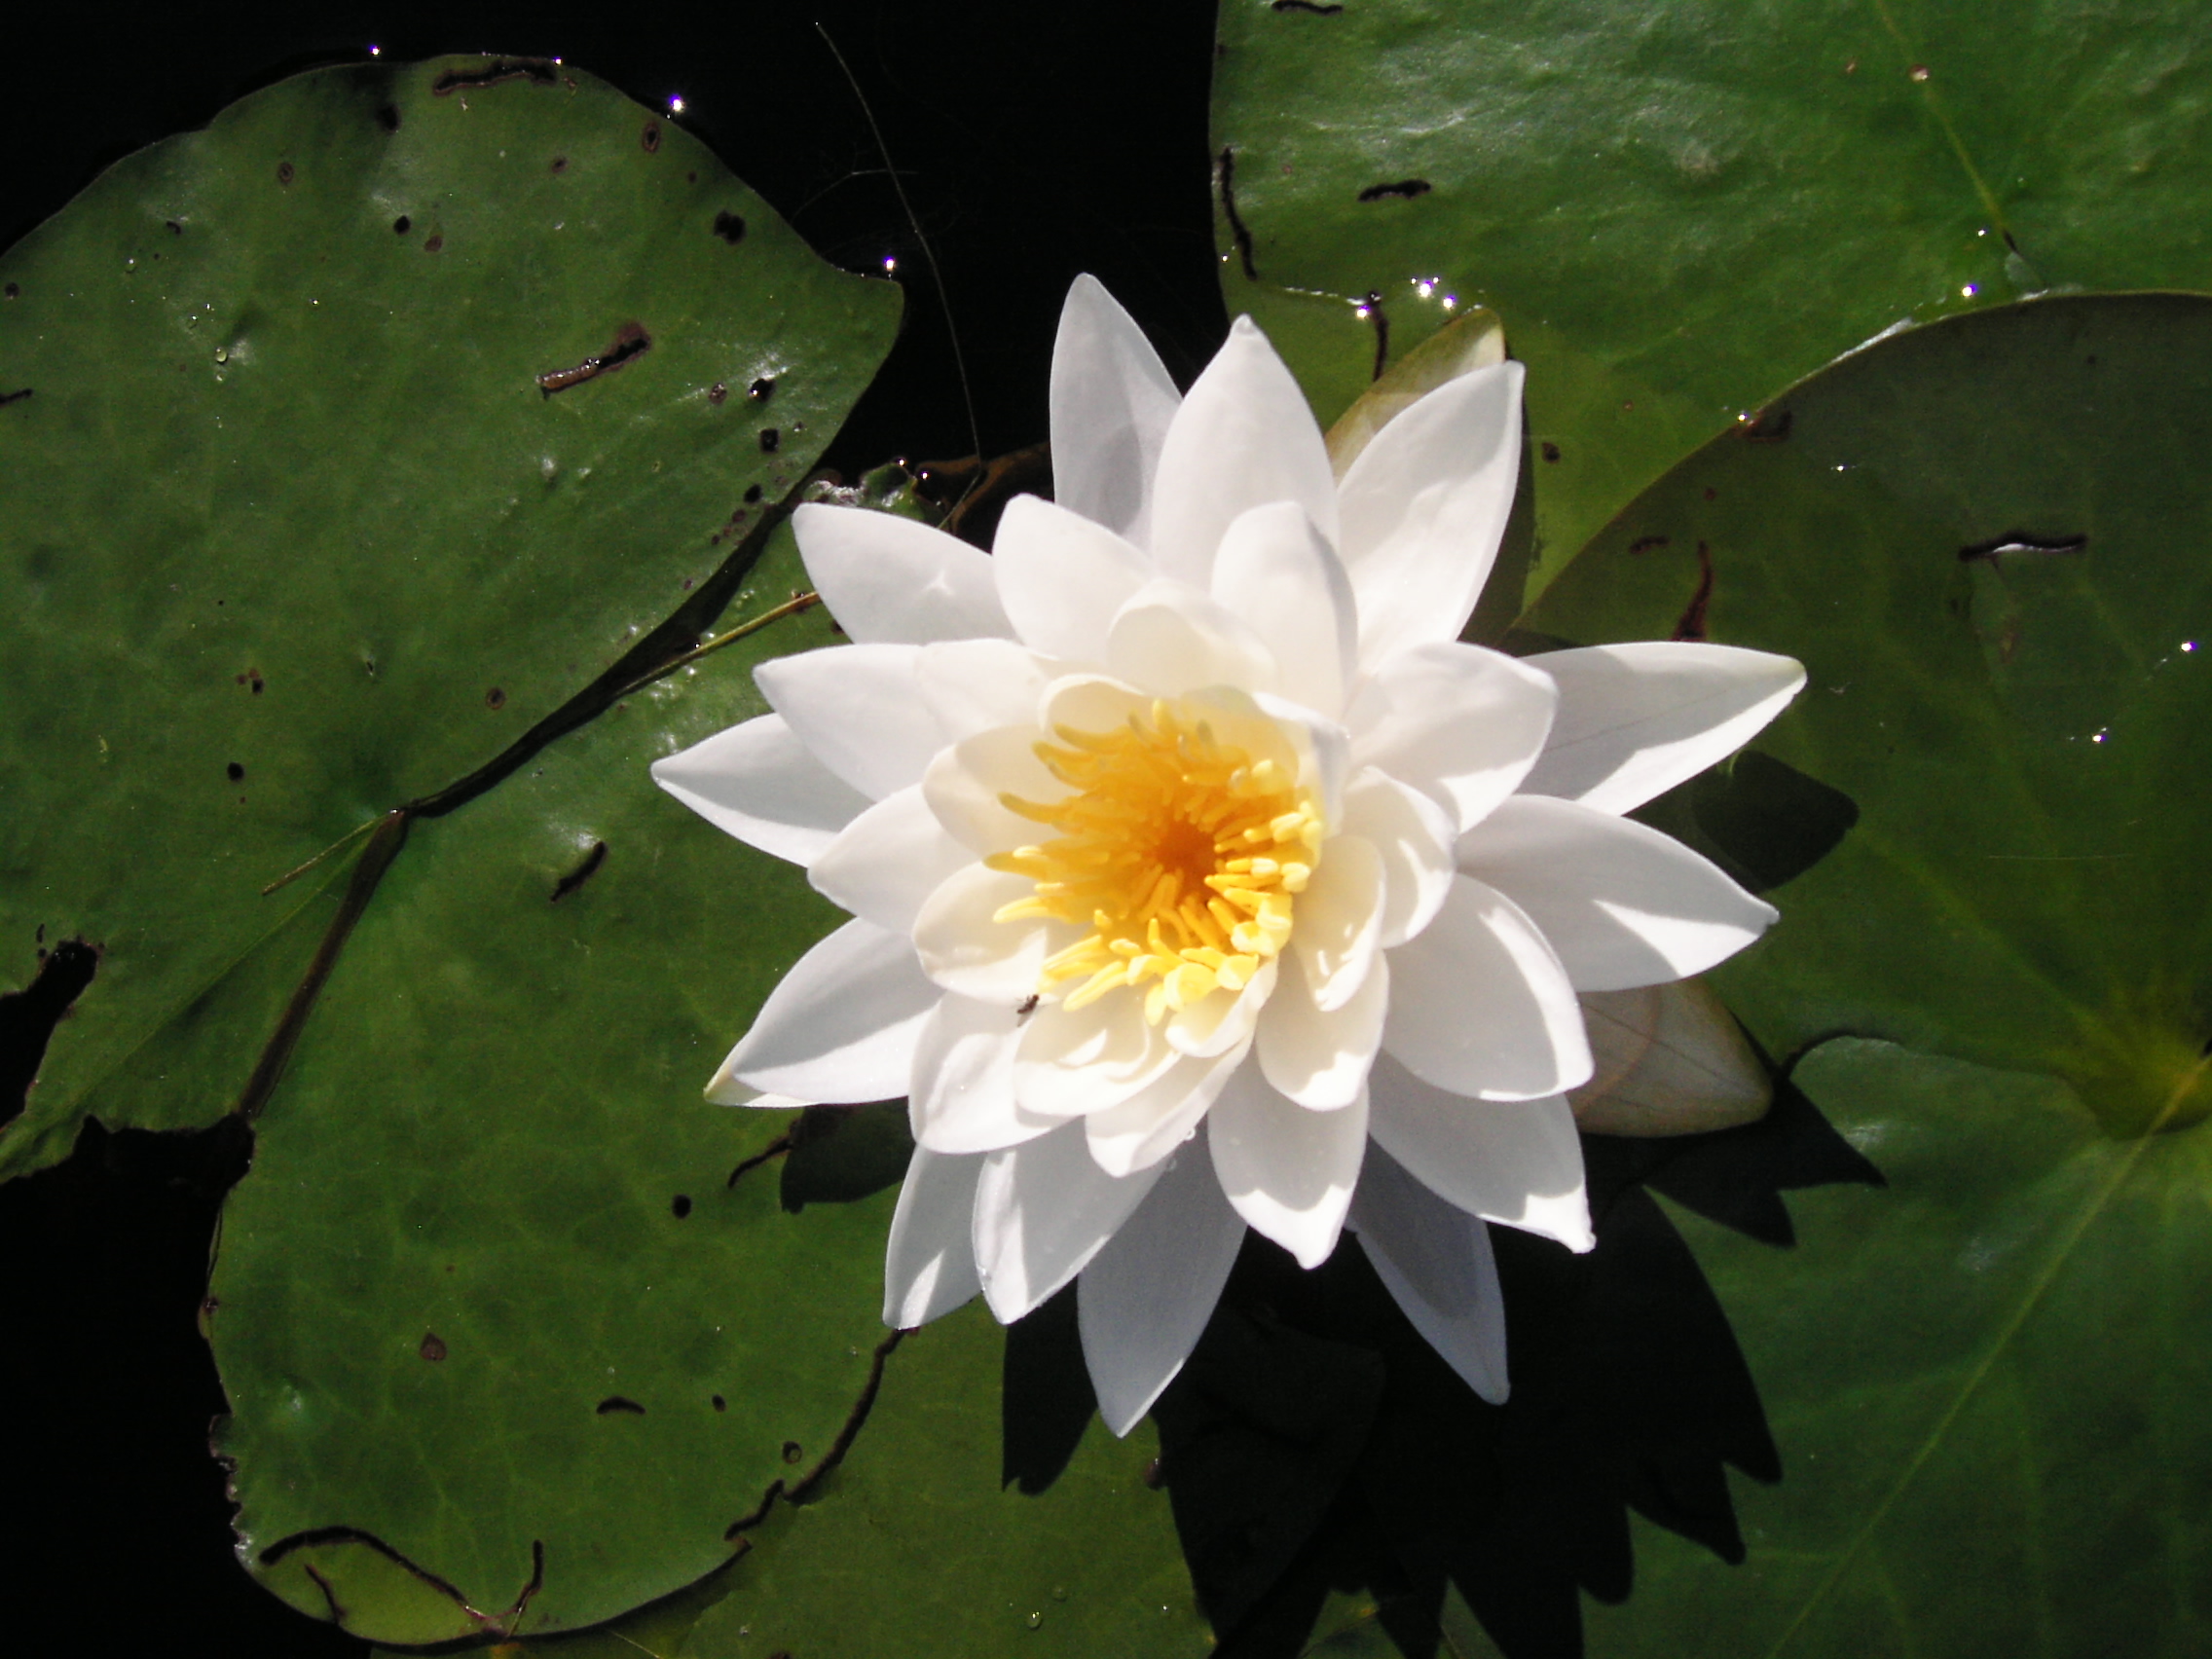 A lily pad flower